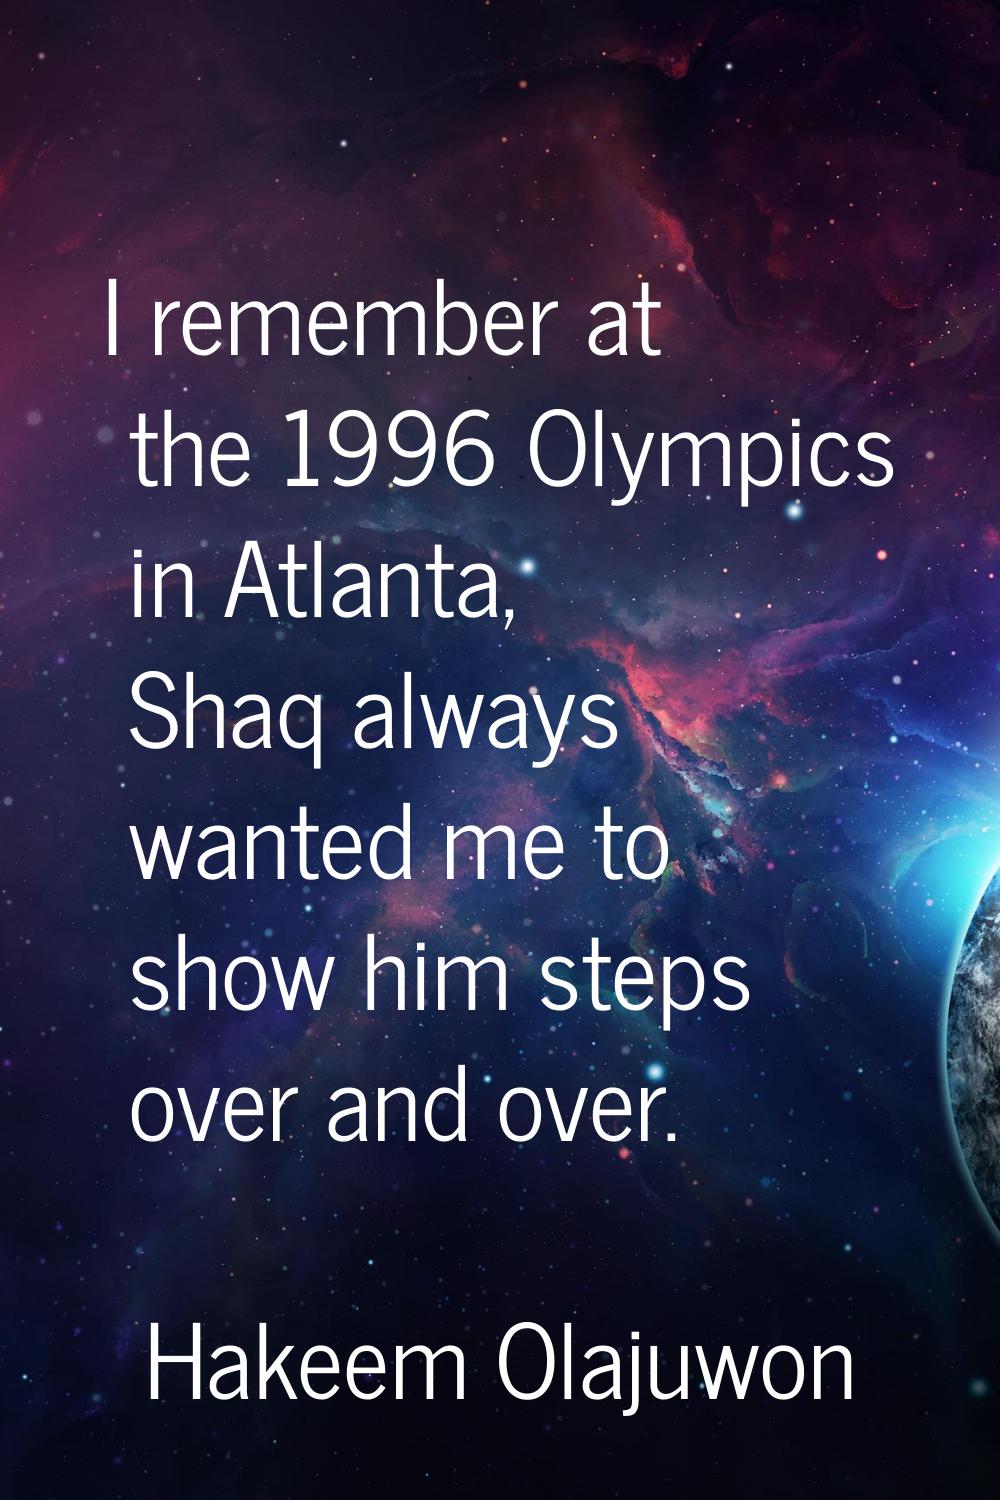 I remember at the 1996 Olympics in Atlanta, Shaq always wanted me to show him steps over and over.